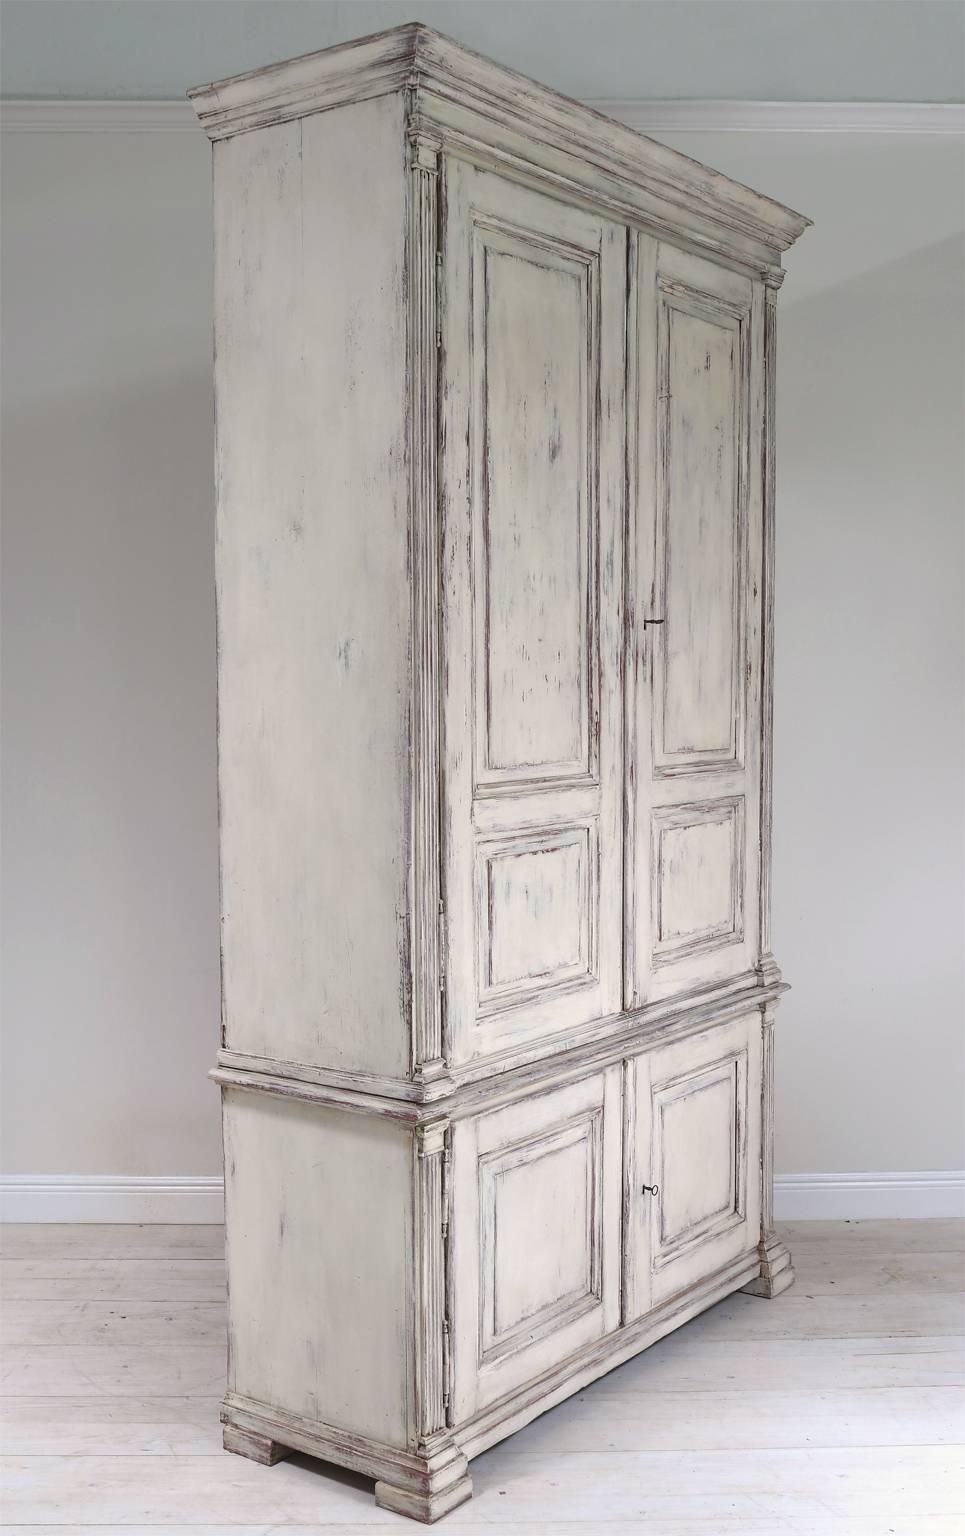 Tall Swedish four-door cupboard painted in the Gustavian manner. Cabinet features fluted pilasters framing a classical configuration of architectural raised door panels. Unit is to two parts. Bottom section features drawers while the top is